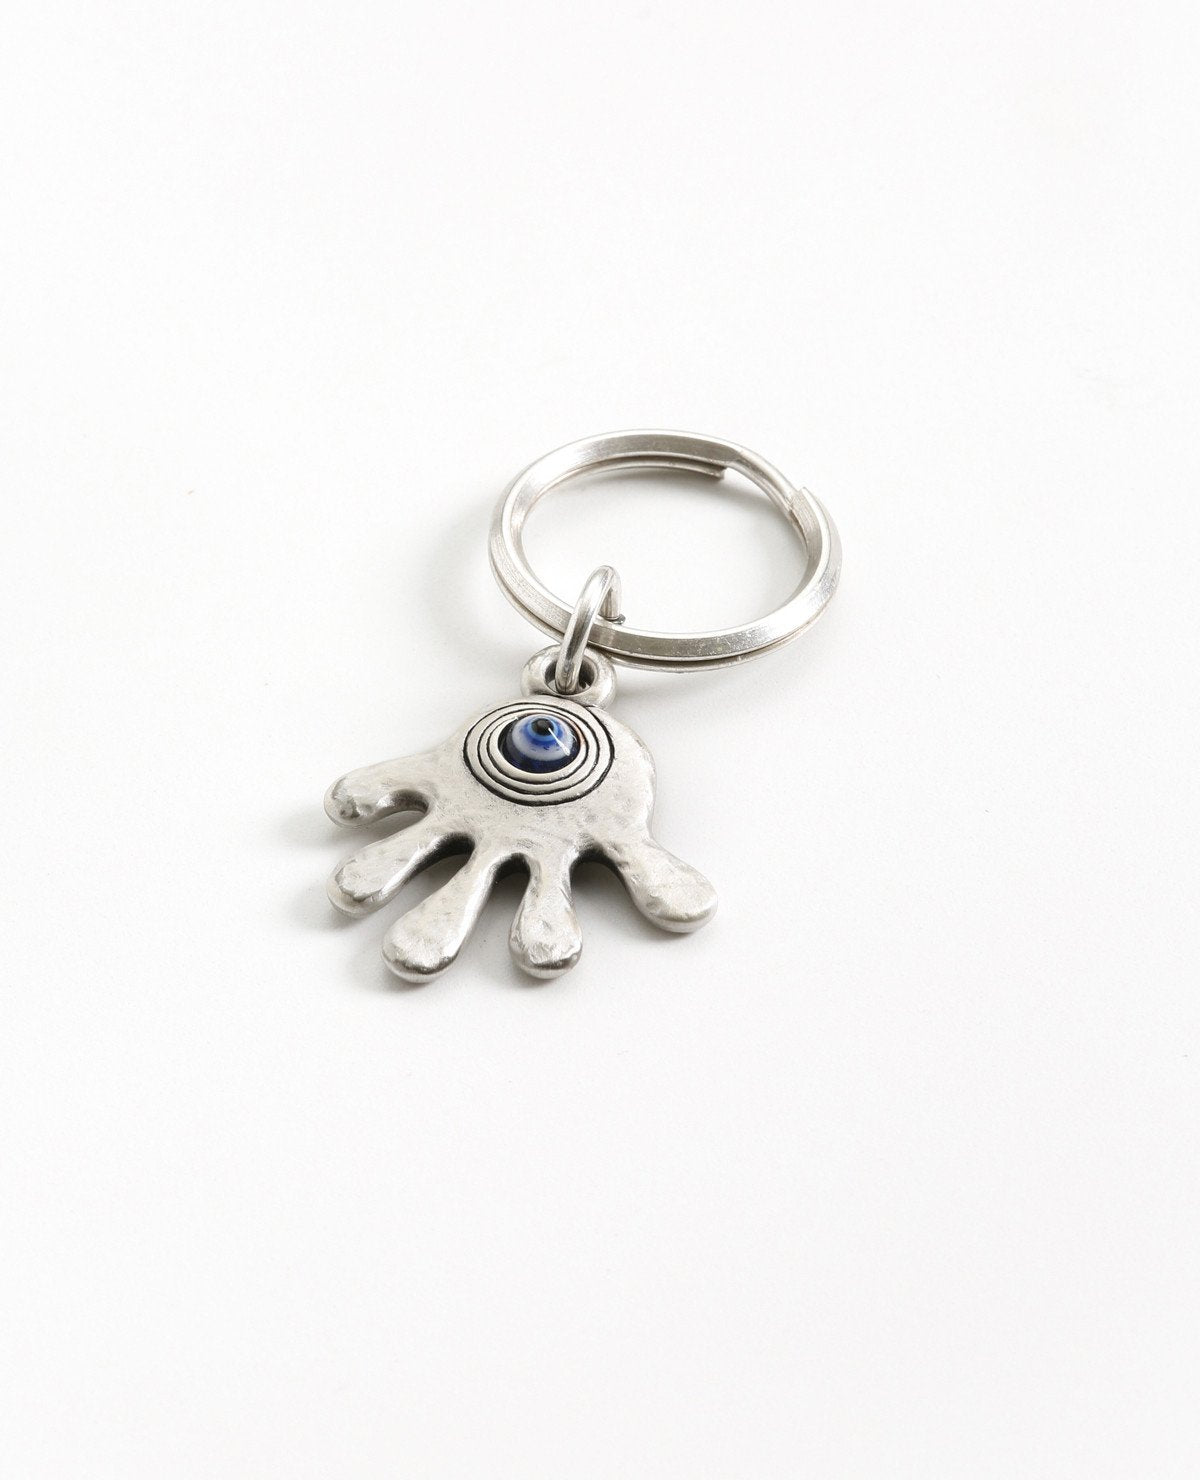 A fun and optimistic keychain that faces forward. Coated in sterling silver and designed in the shape of a Hamsa with fingers spread. On one side a decorated blue eye, and the other side is engraved with the words "every ending is a new beginning". A wonderful gift for all the endings or beginnings in life. The possibilities are endless, the protection is already inside, or how shall we put it gently.... Hamsa Hamsa!  Length: 5 cm  Width: 4 cm